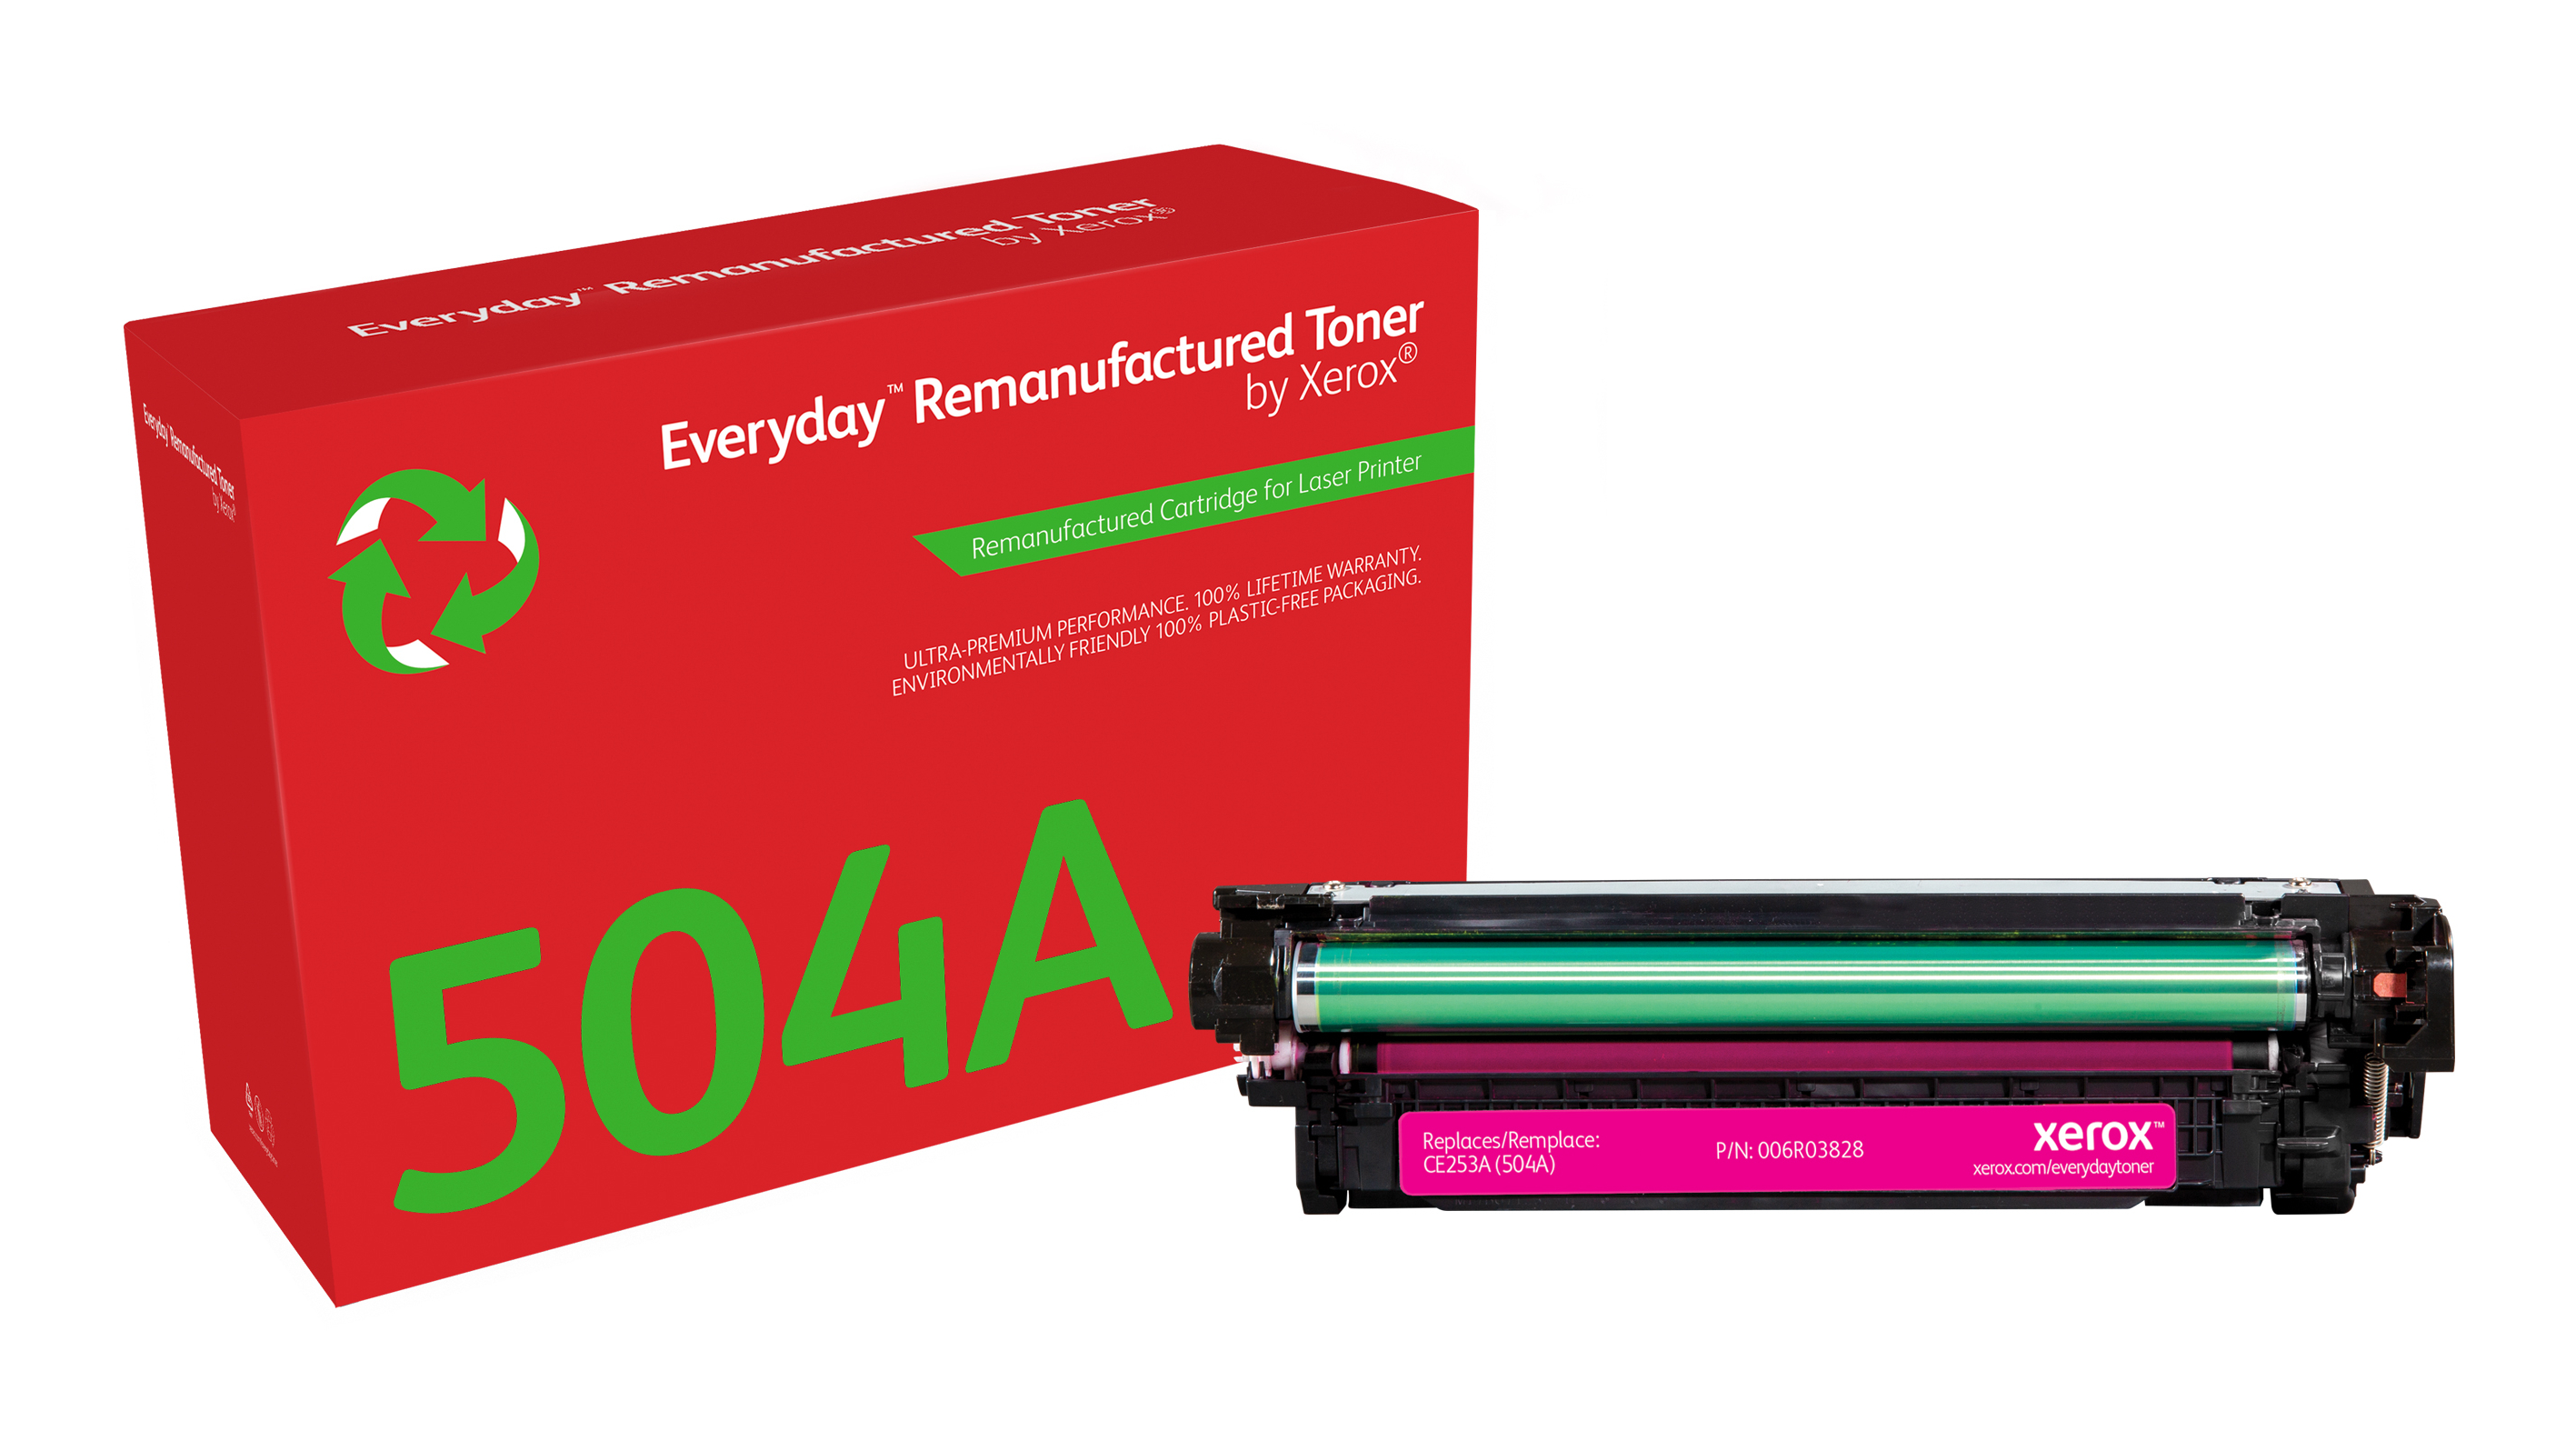 Everyday Magenta Toner compatible with HP CE253A, Standard Yield 006R03828  by Xerox